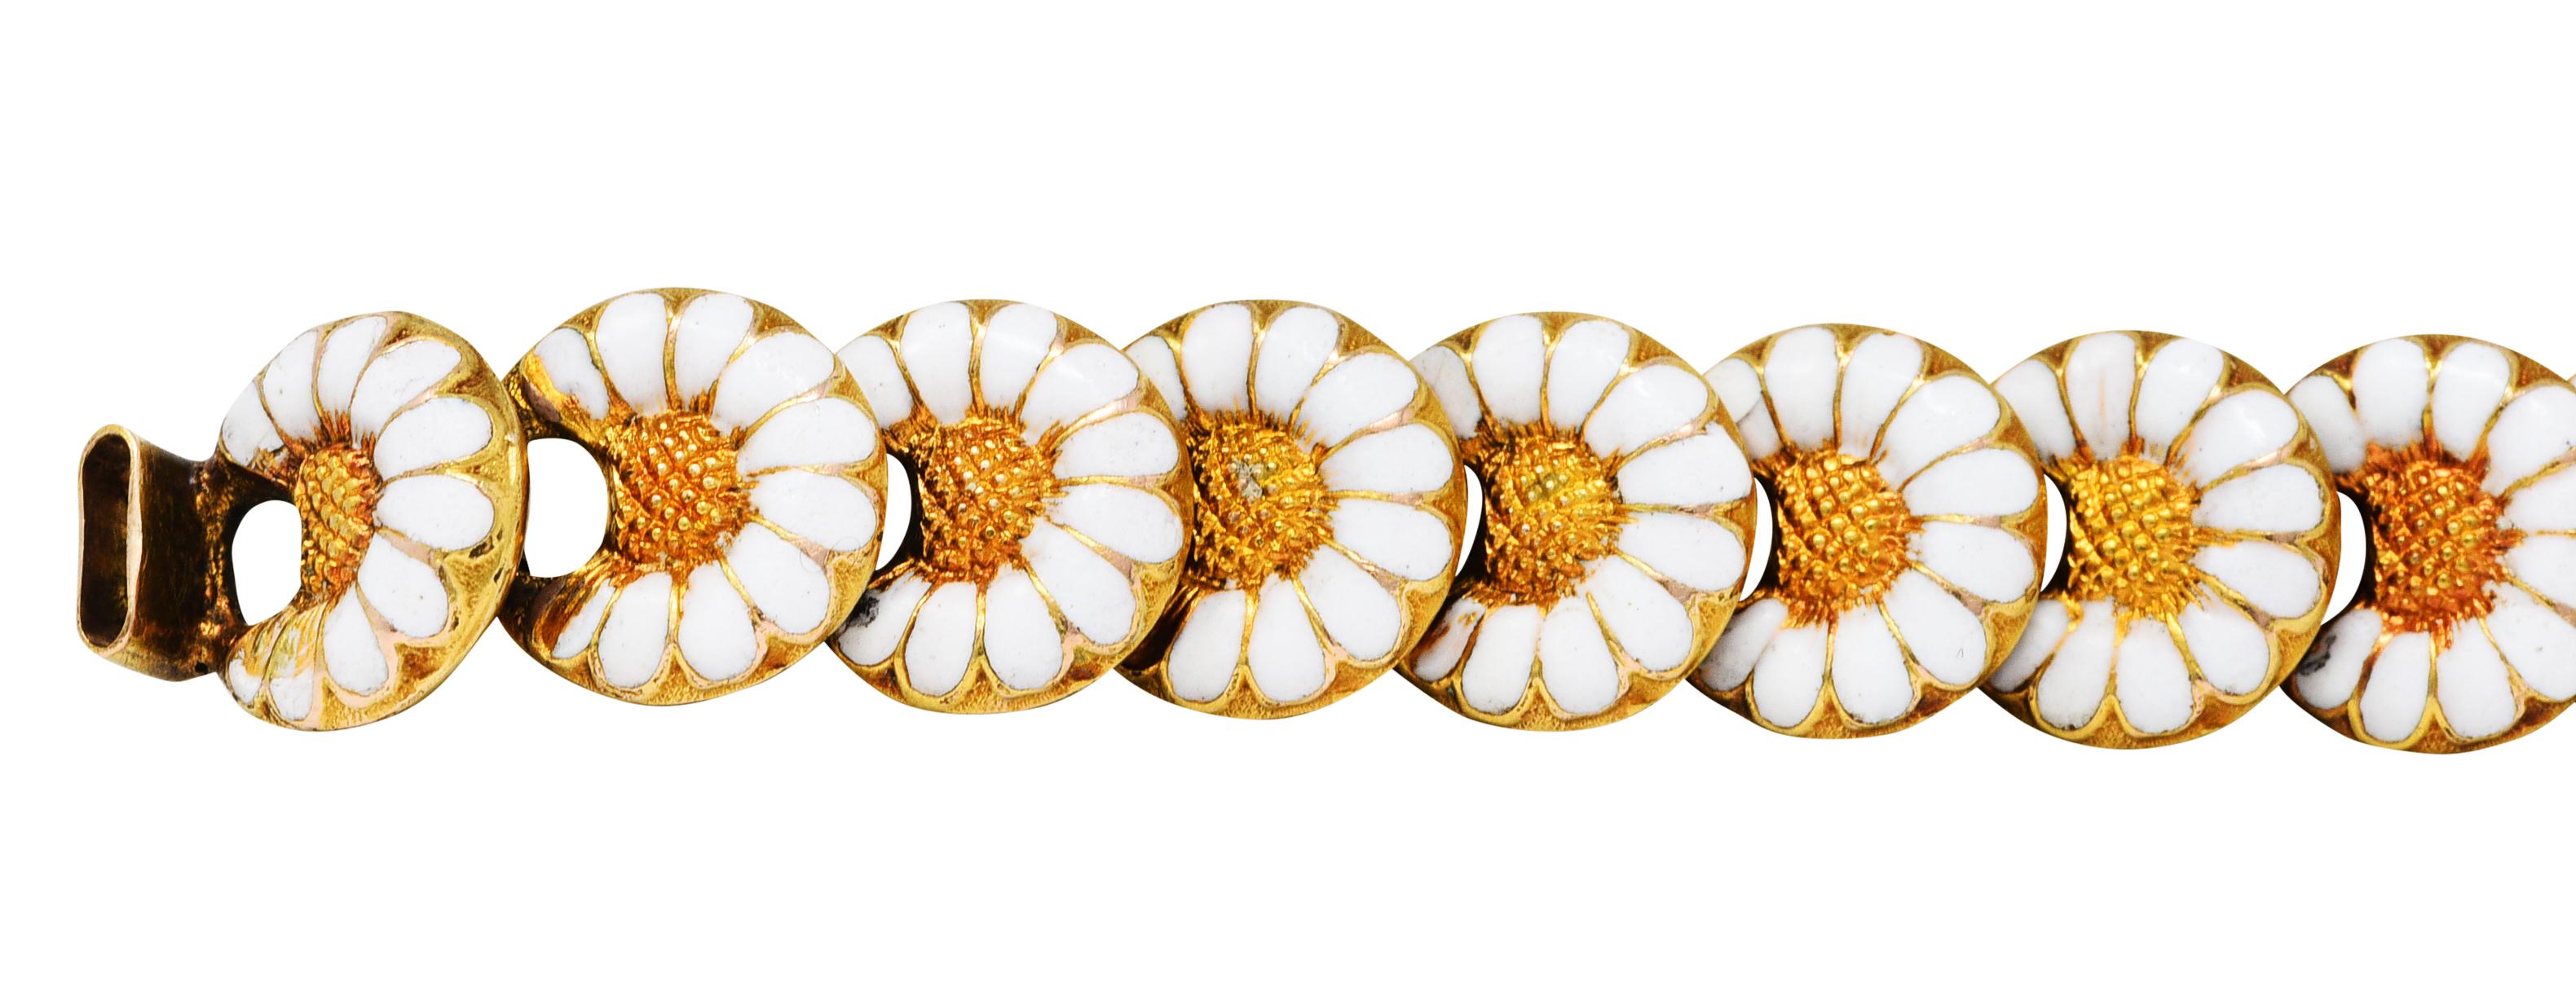 Bracelet is comprised of puffed circular links designed as daisy motifs

With texturous centers and petals glossed with opaque white enamel - some loss

Completes as a unique hook and eye clasp that secures with a functioning heart padlock

With a